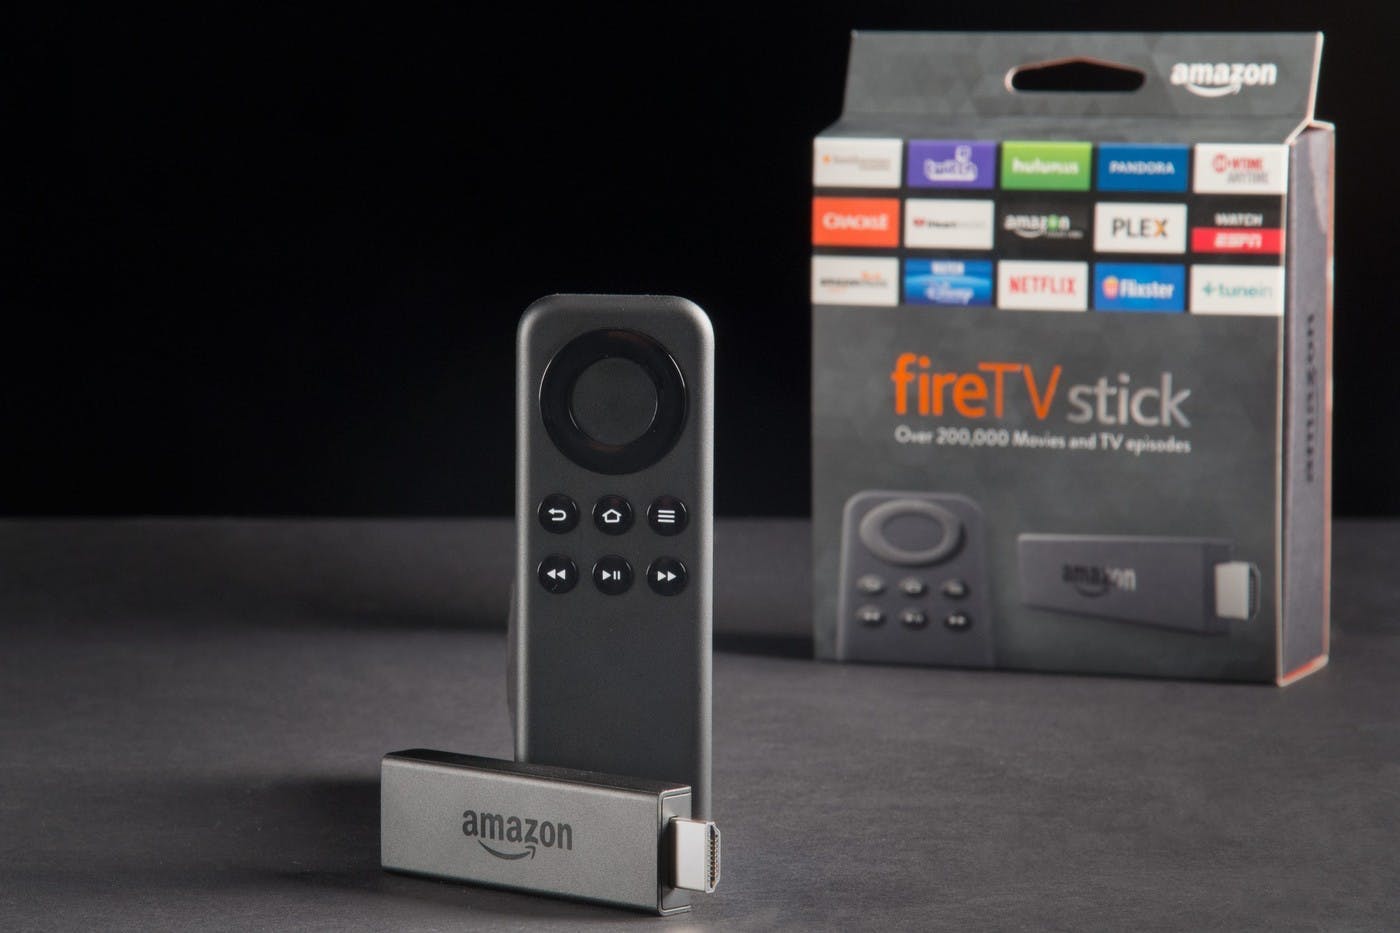 Fire TV Stick vs Fire TV Stick Lite - What's the difference?